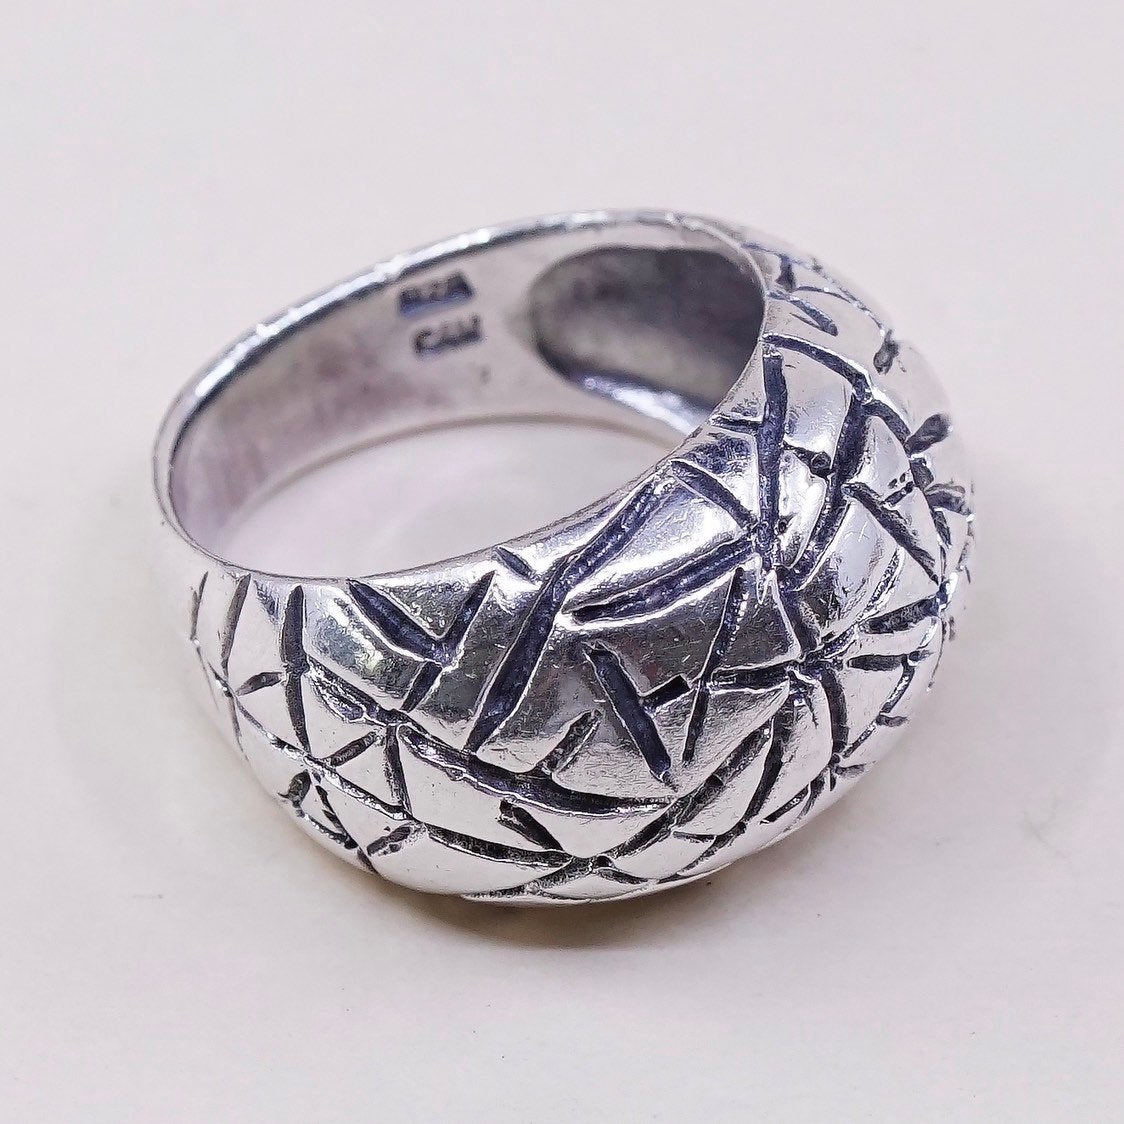 sz 4.75, vtg sterling silver handmade ring, 925 band w/ spiderwebbed textured